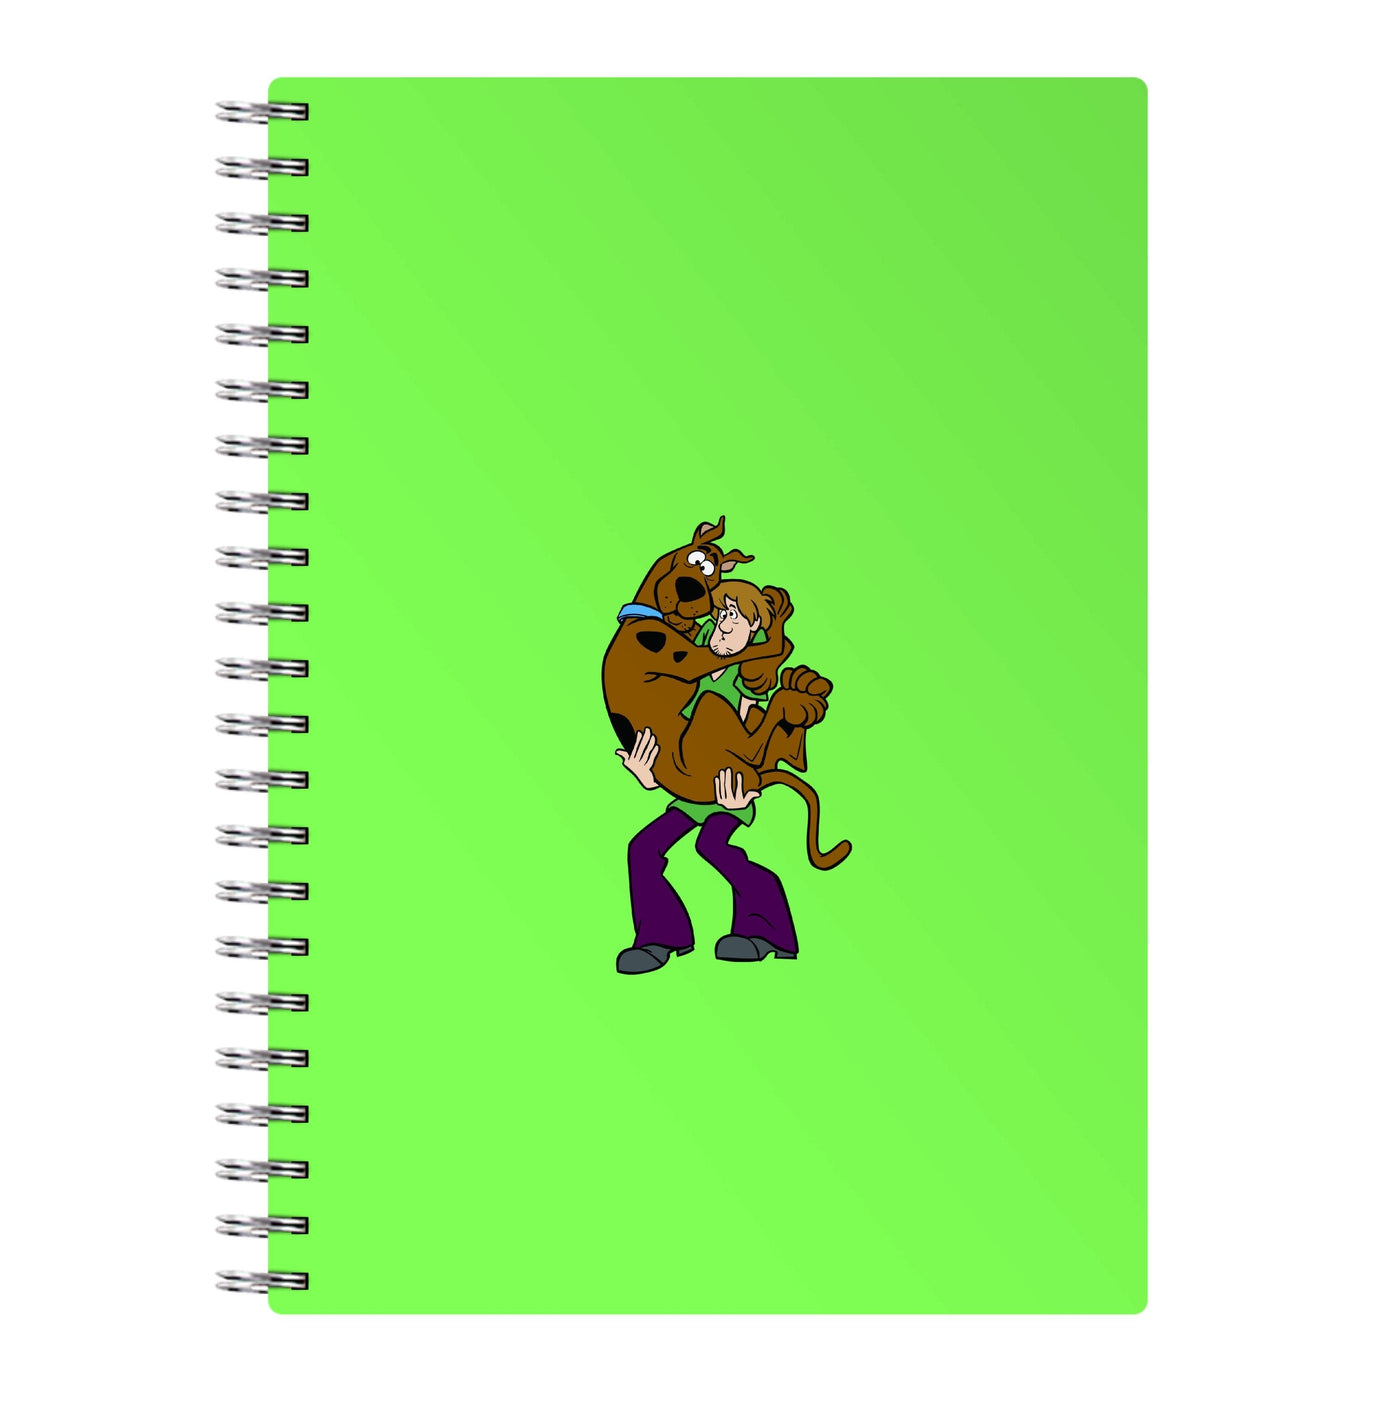 Shaggy And Scooby - Scooby Doo Notebook